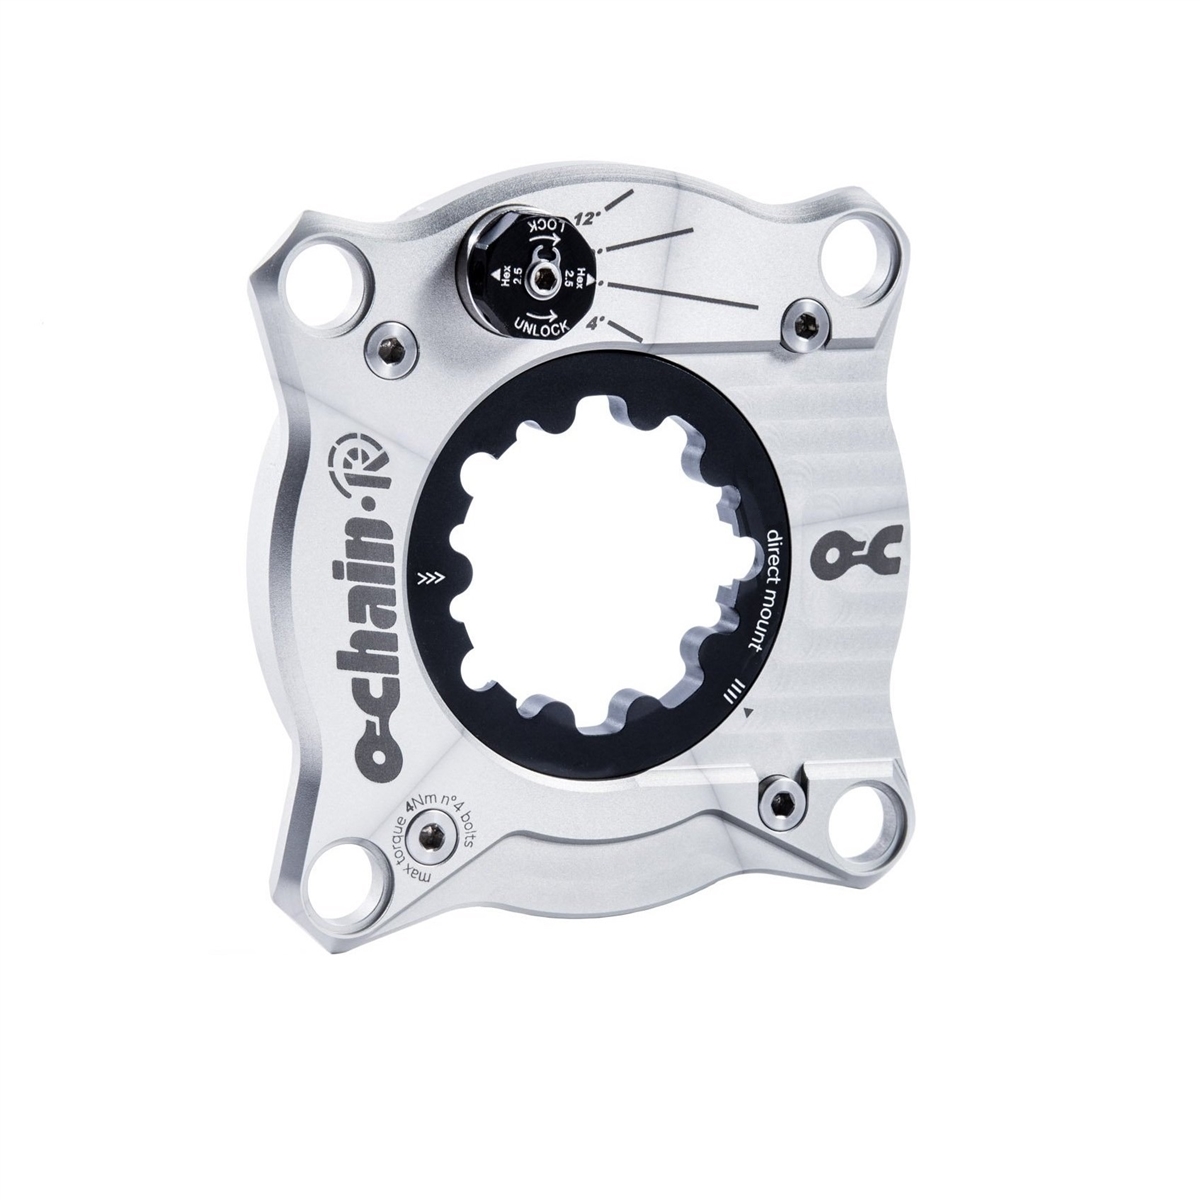 Active Spider R With Direct Mount Adjustment for Shimano Pregio